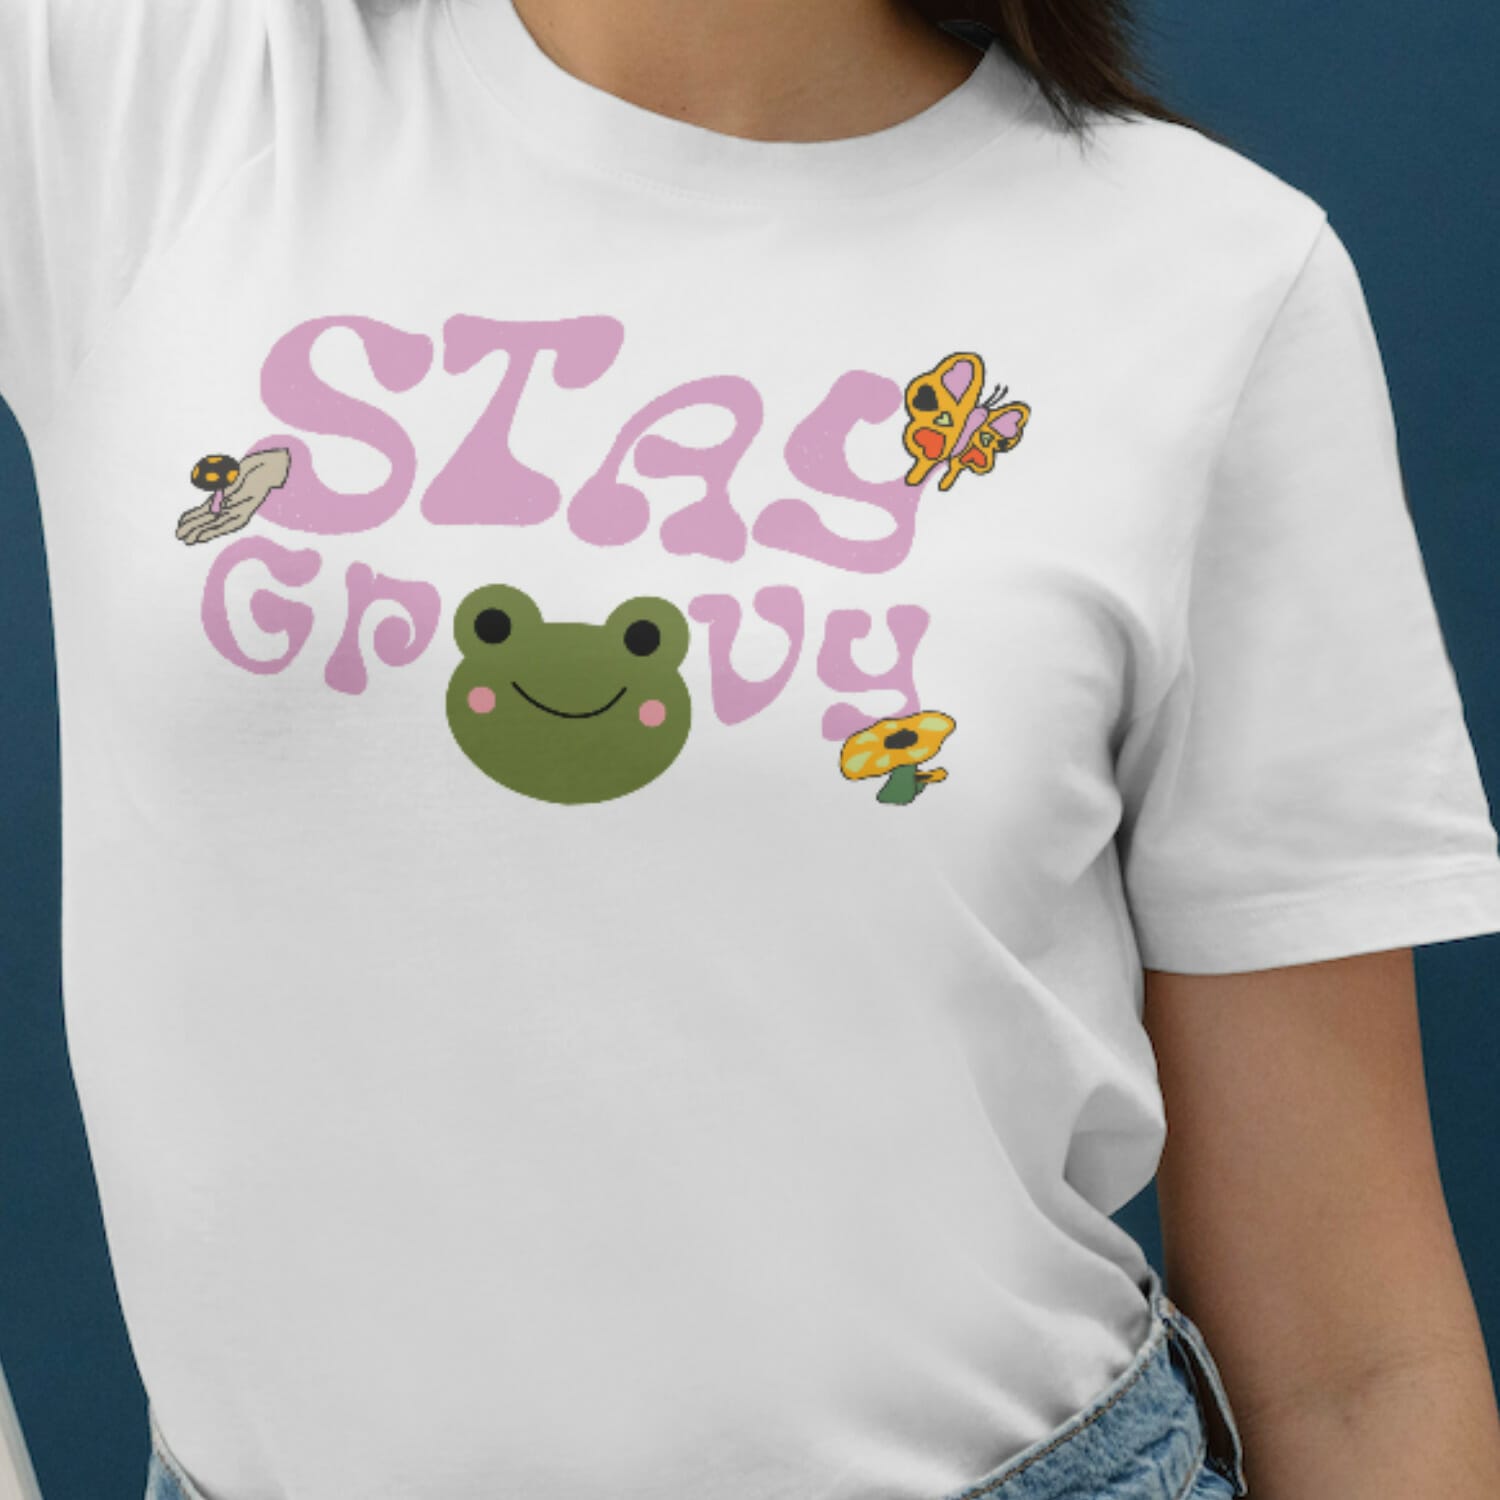 Stay Groovy Frog T-shirt design